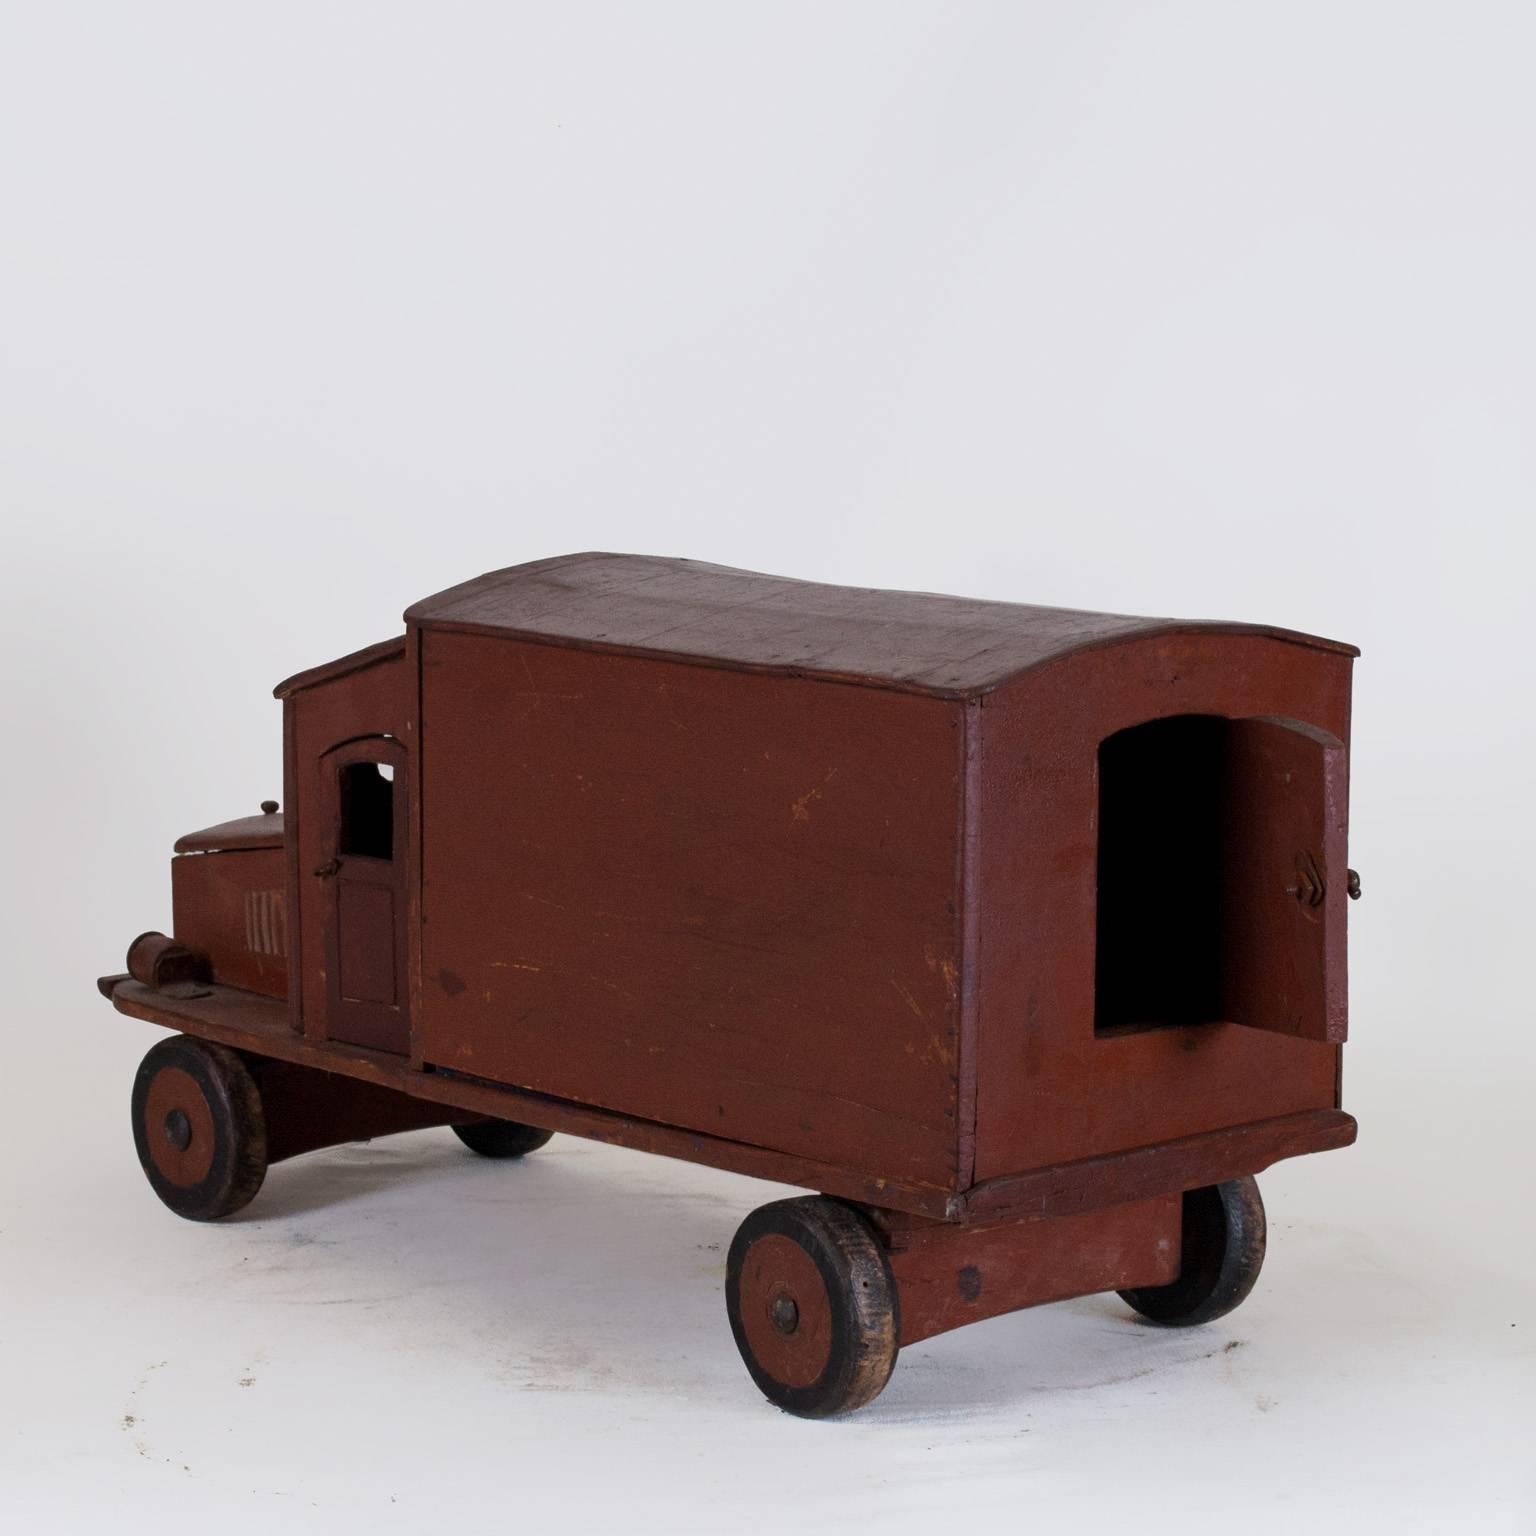 A dark red model truck of an antique French lorry with opening doors and removable back part, in good condition. Hand crafted in wood and hand painted. Minor fading, due to age. Wear consistent with age and use, circa 1920-1930, France.